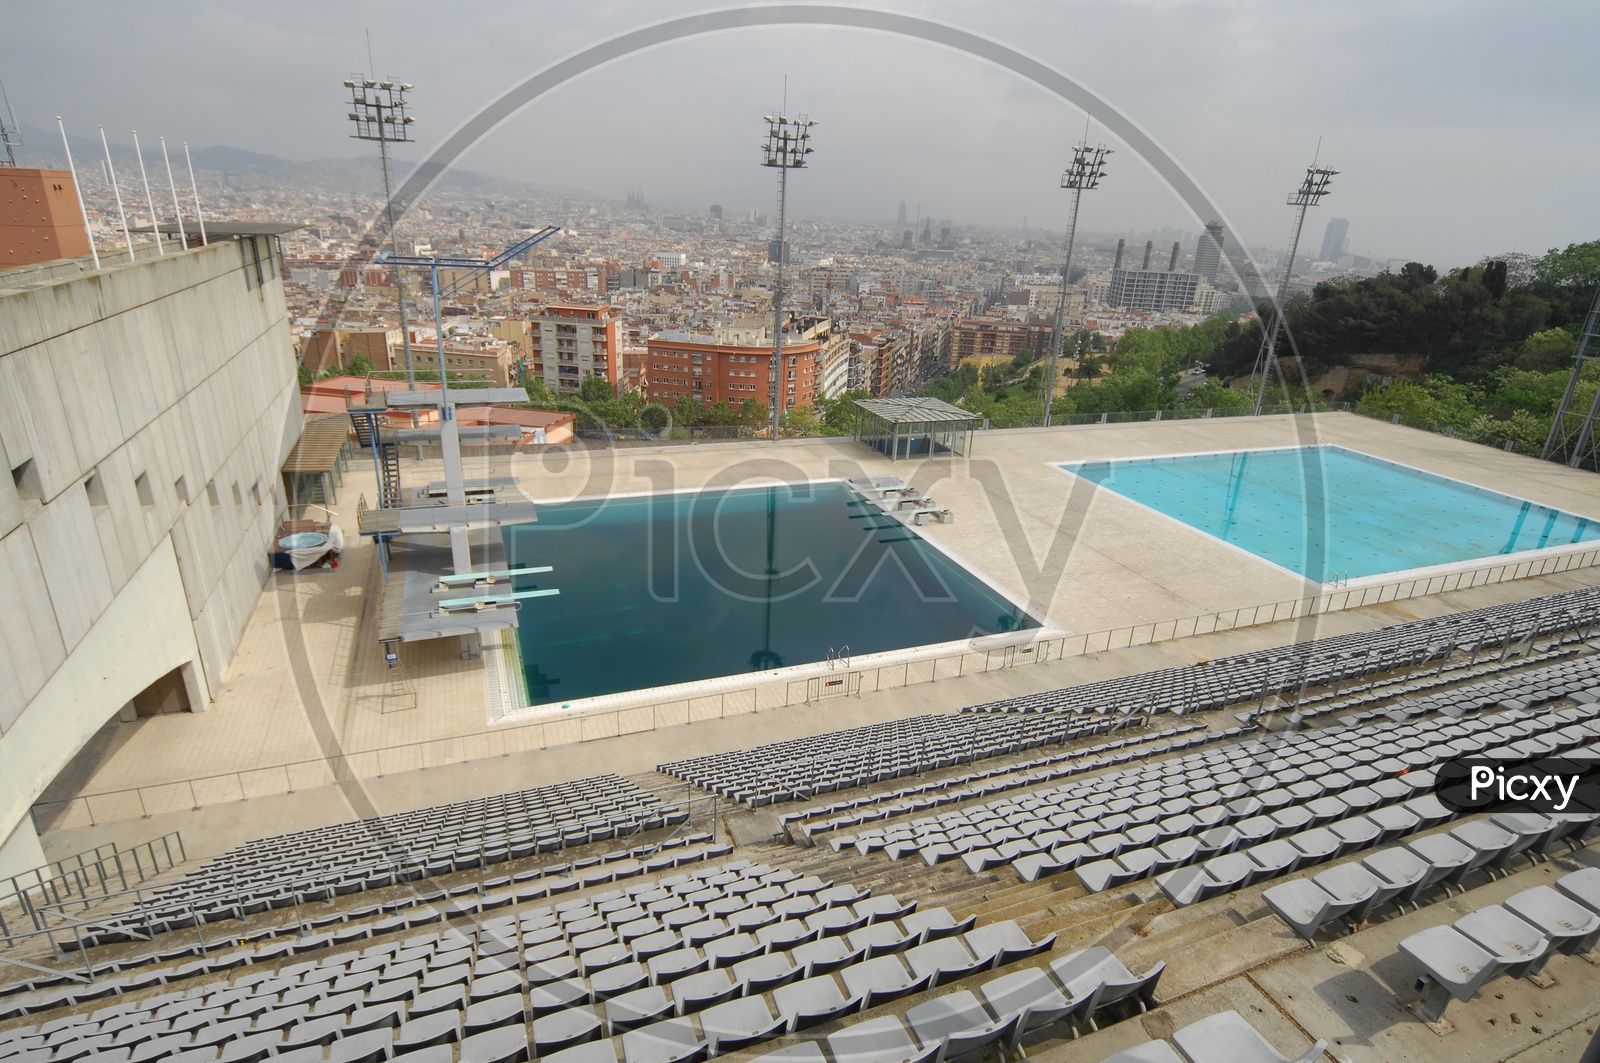 View of audience seating arrangement of the swimming pool